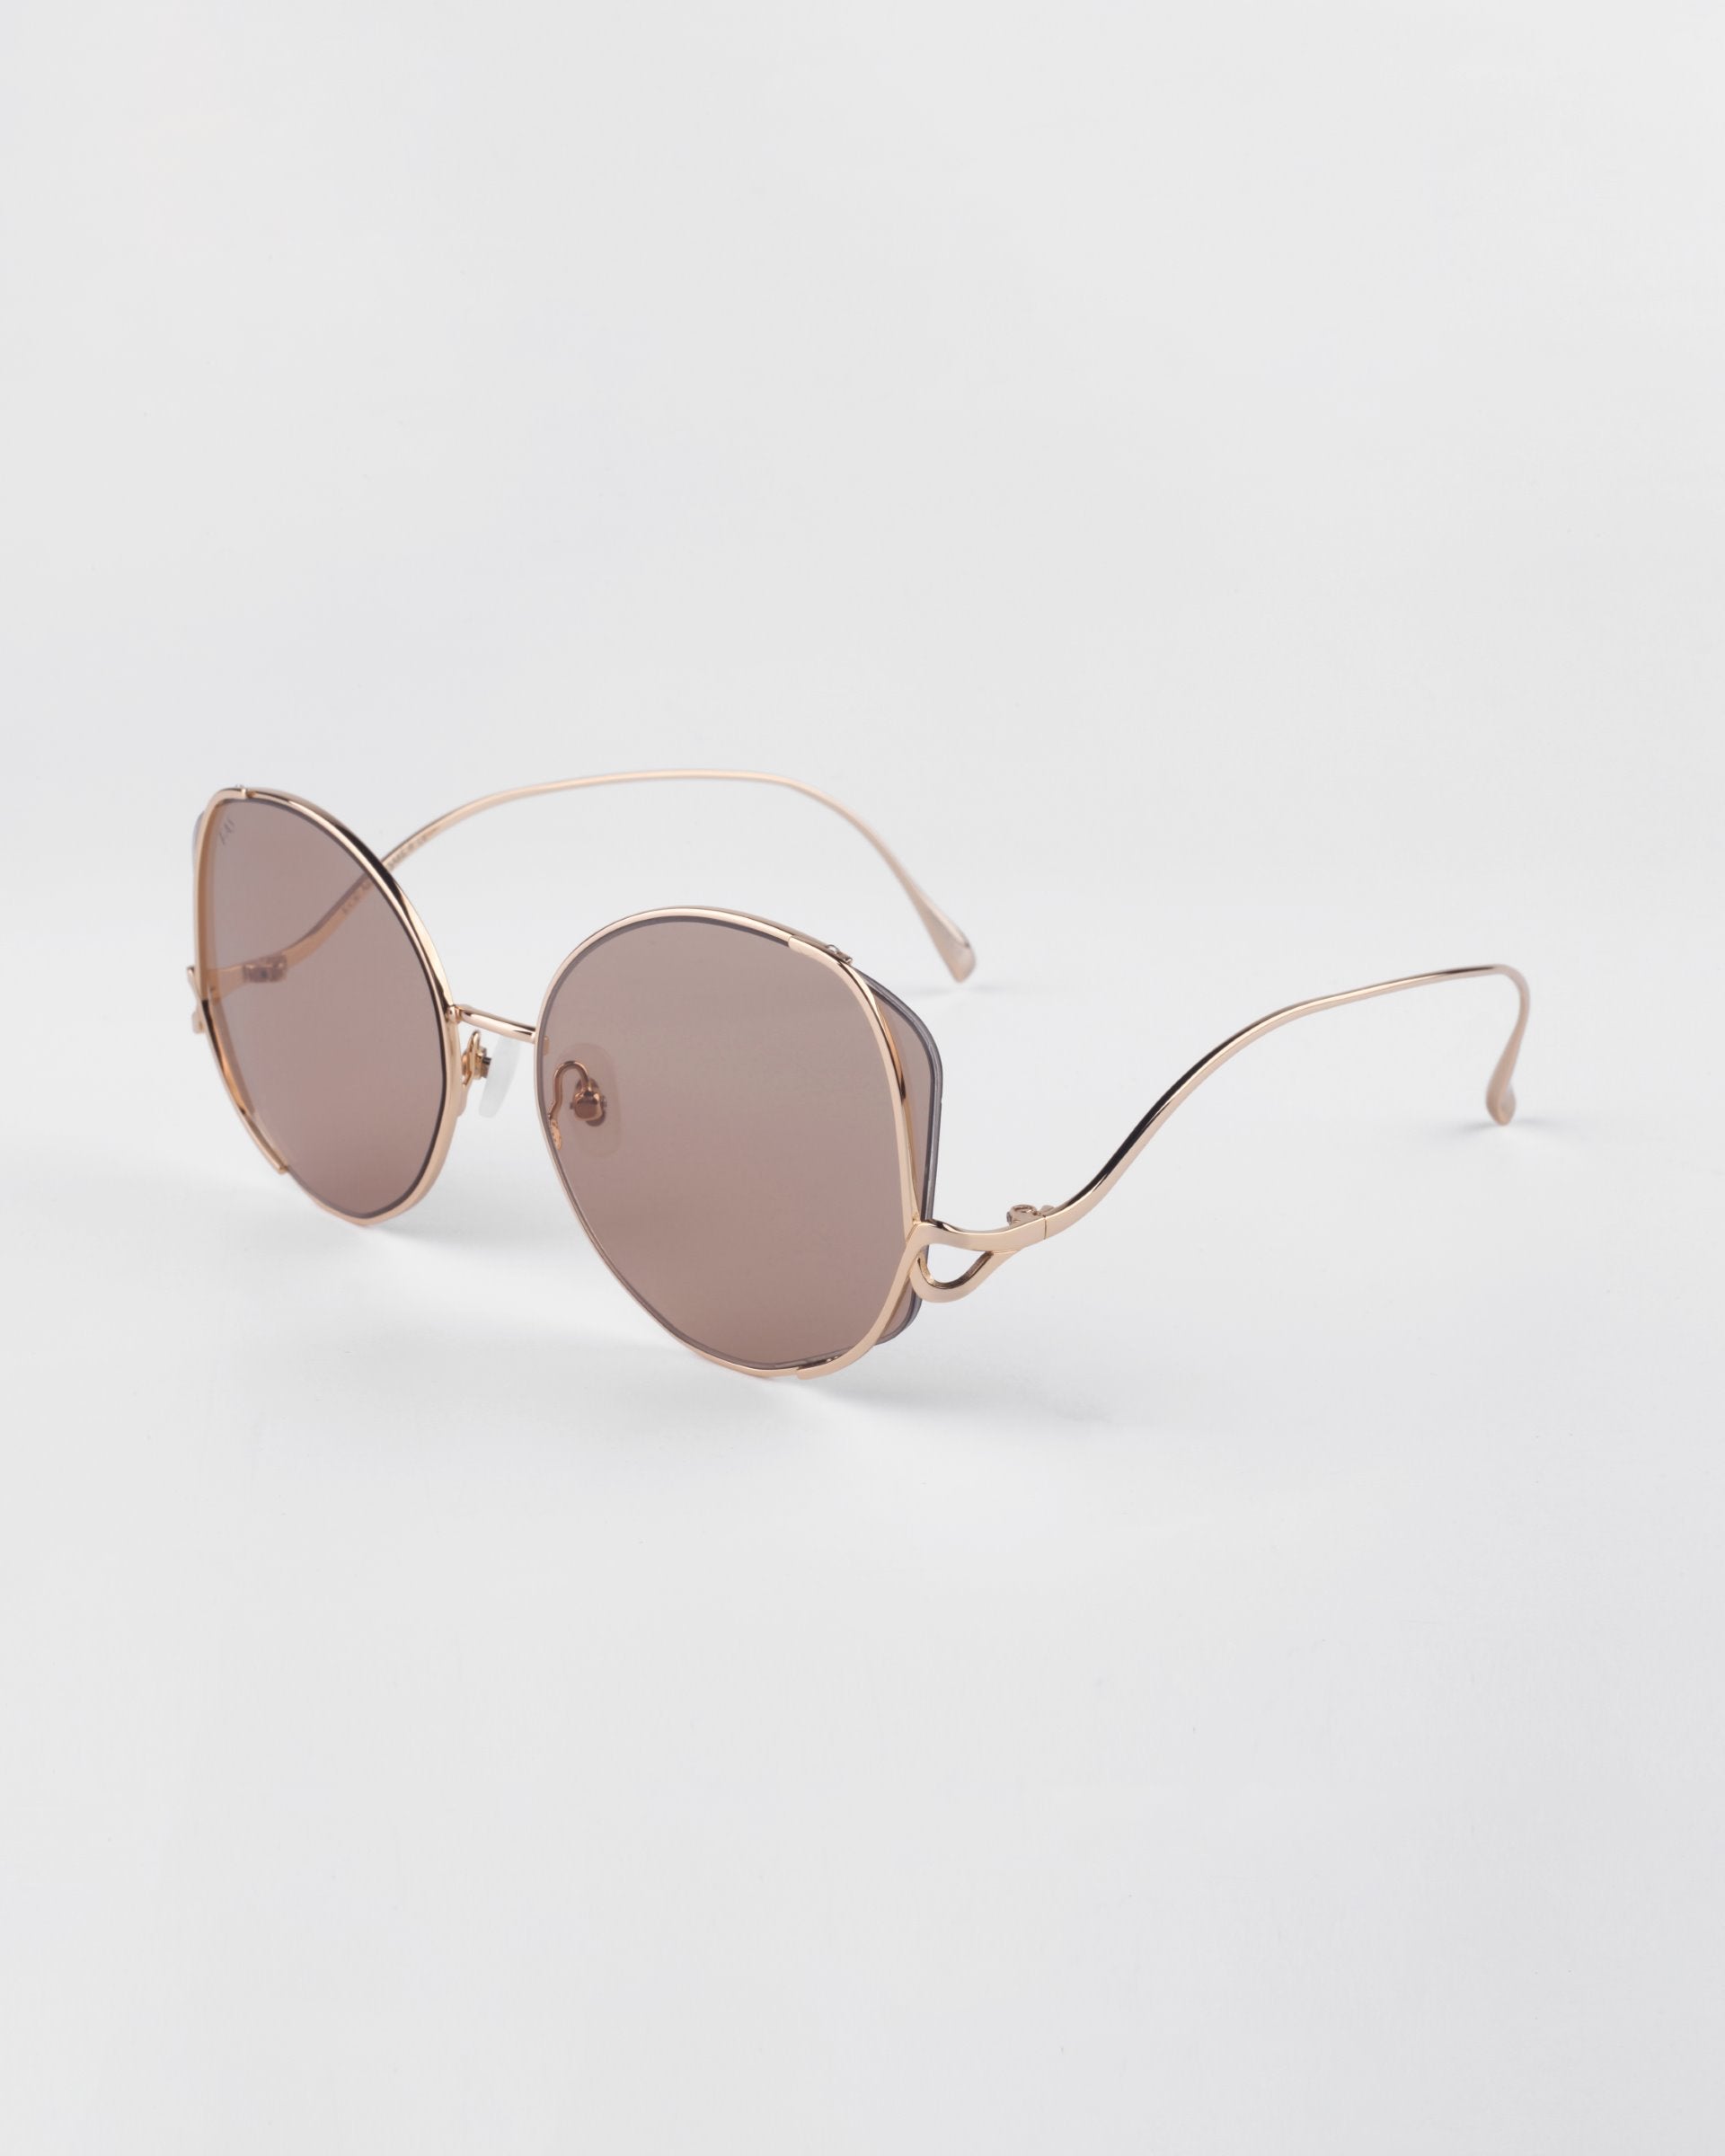 For Art&#39;s Sake &#39;Canvas&#39; sunglasses in sand. A side view image showing the gold frame details with circle shapes. 